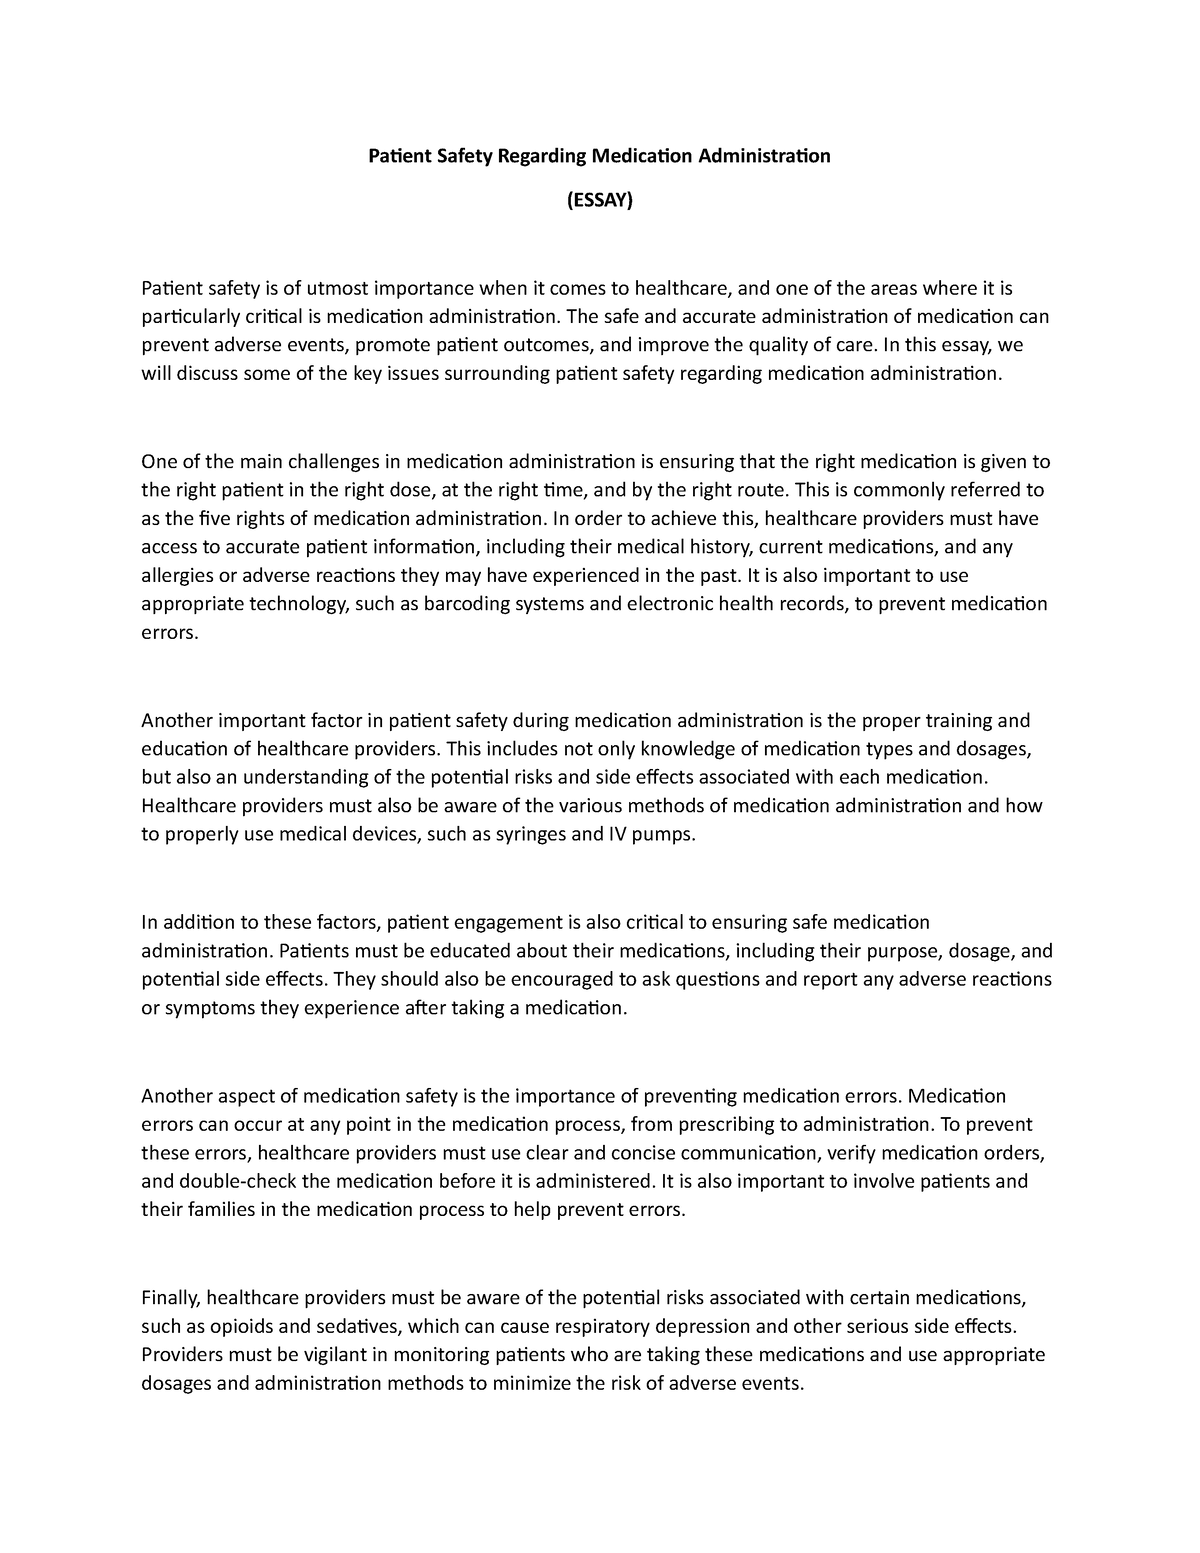 essay about patient safety